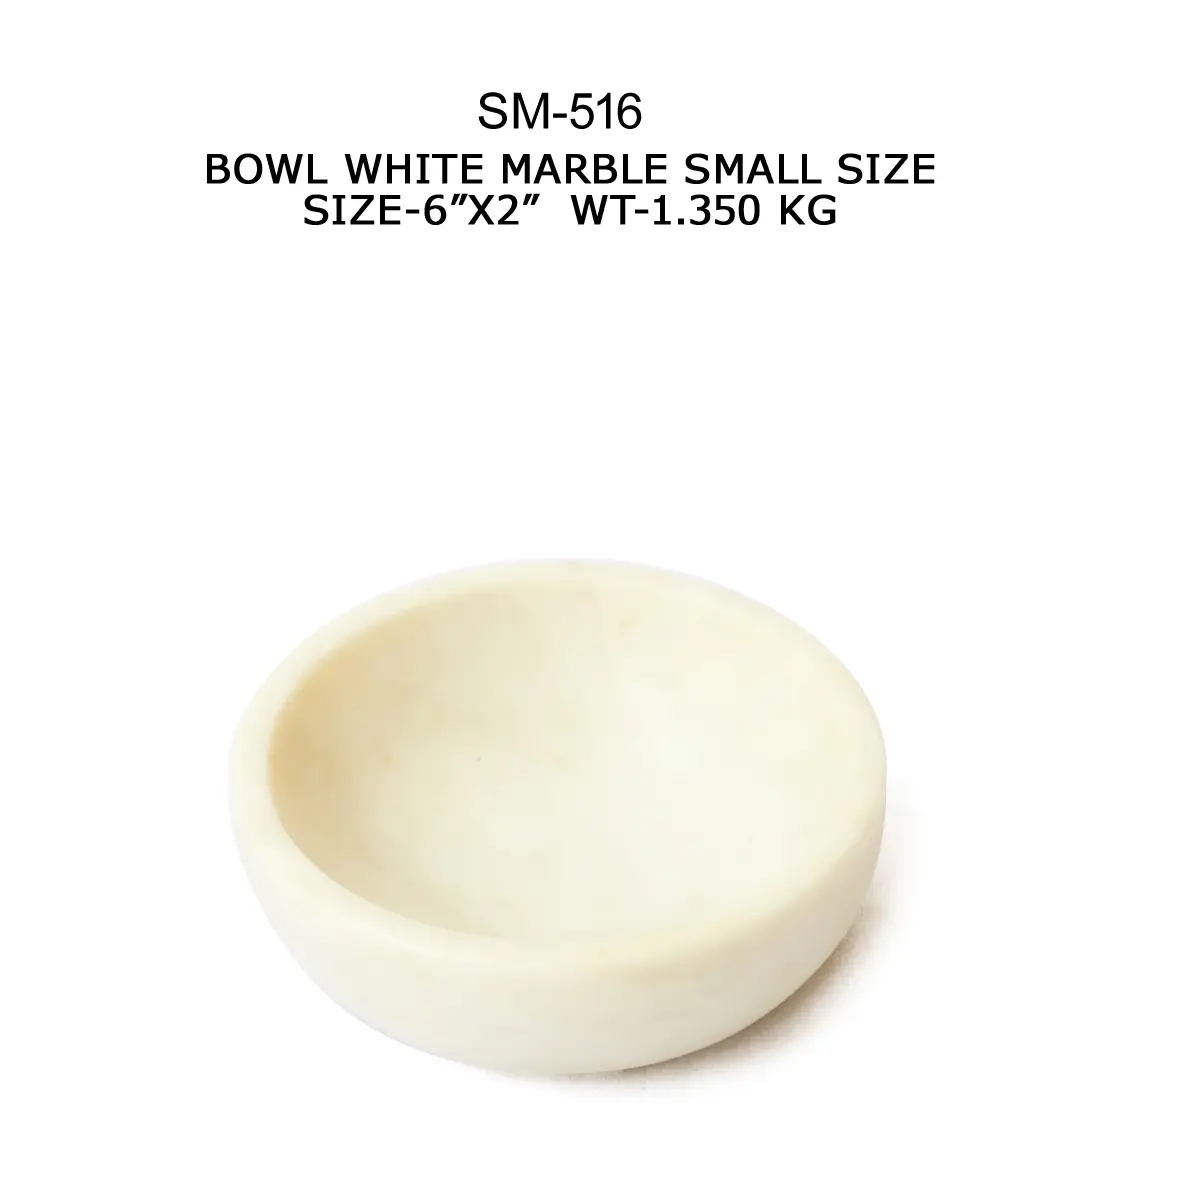 BOWL SAMPLE NO. 15 IN WHITE MARBLE IN SMALL
SIZE